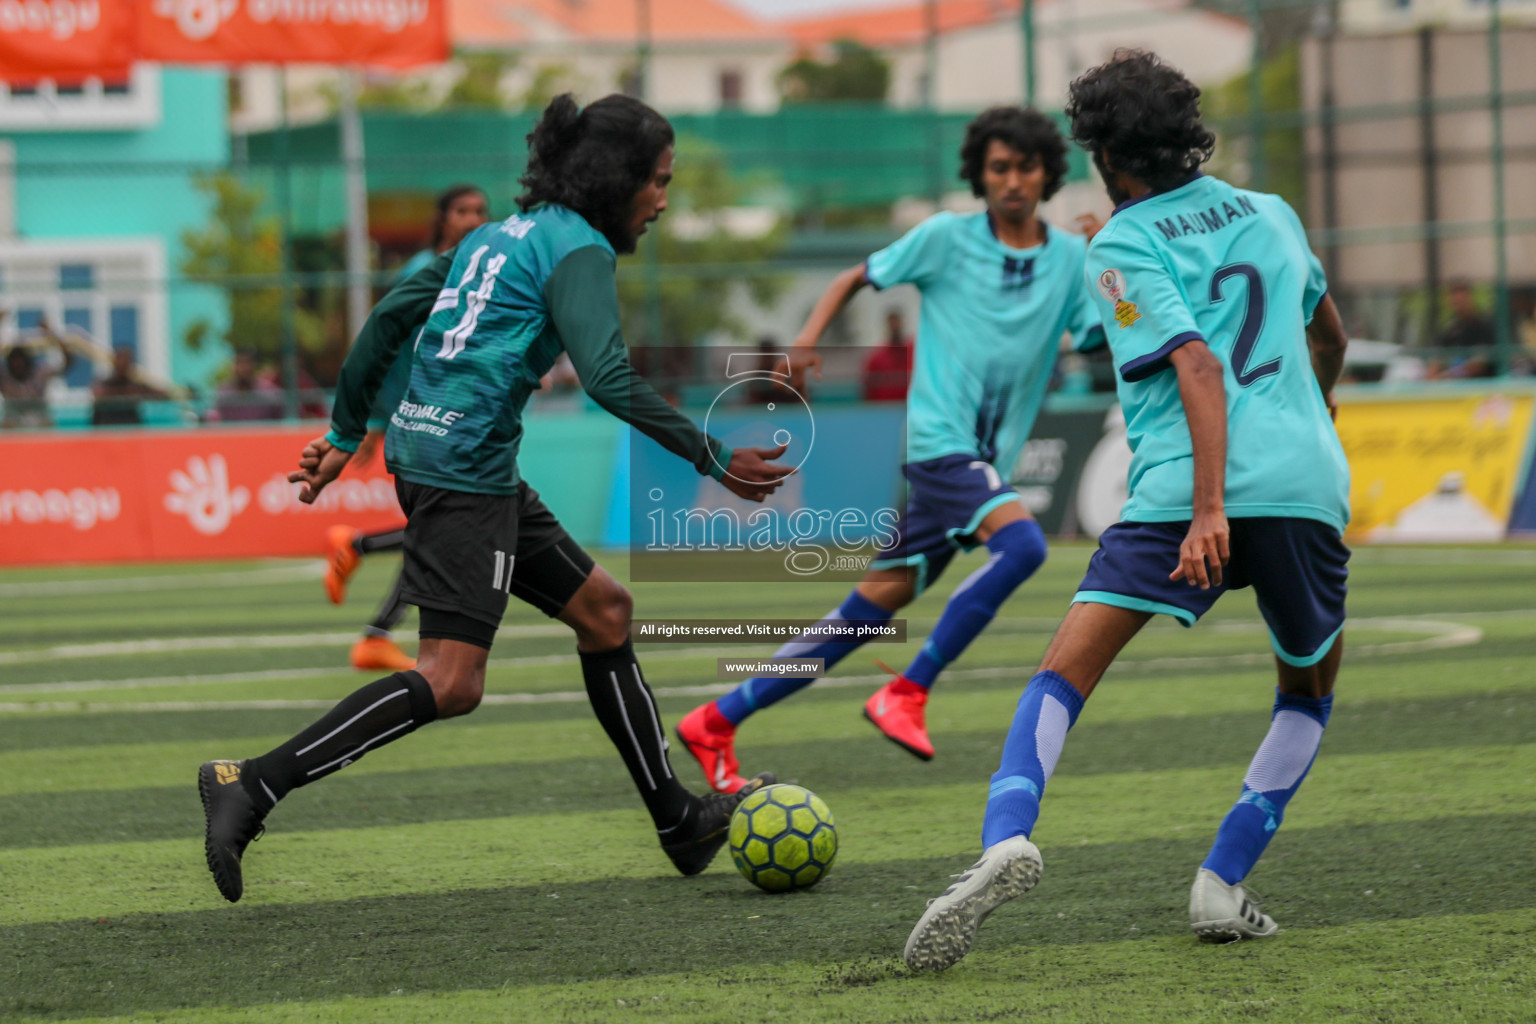 Club Maldives Day 11 in Hulhumale, Male', Maldives on 21st April 2019 Photos: Suadh Abdul Sattar /images.mv